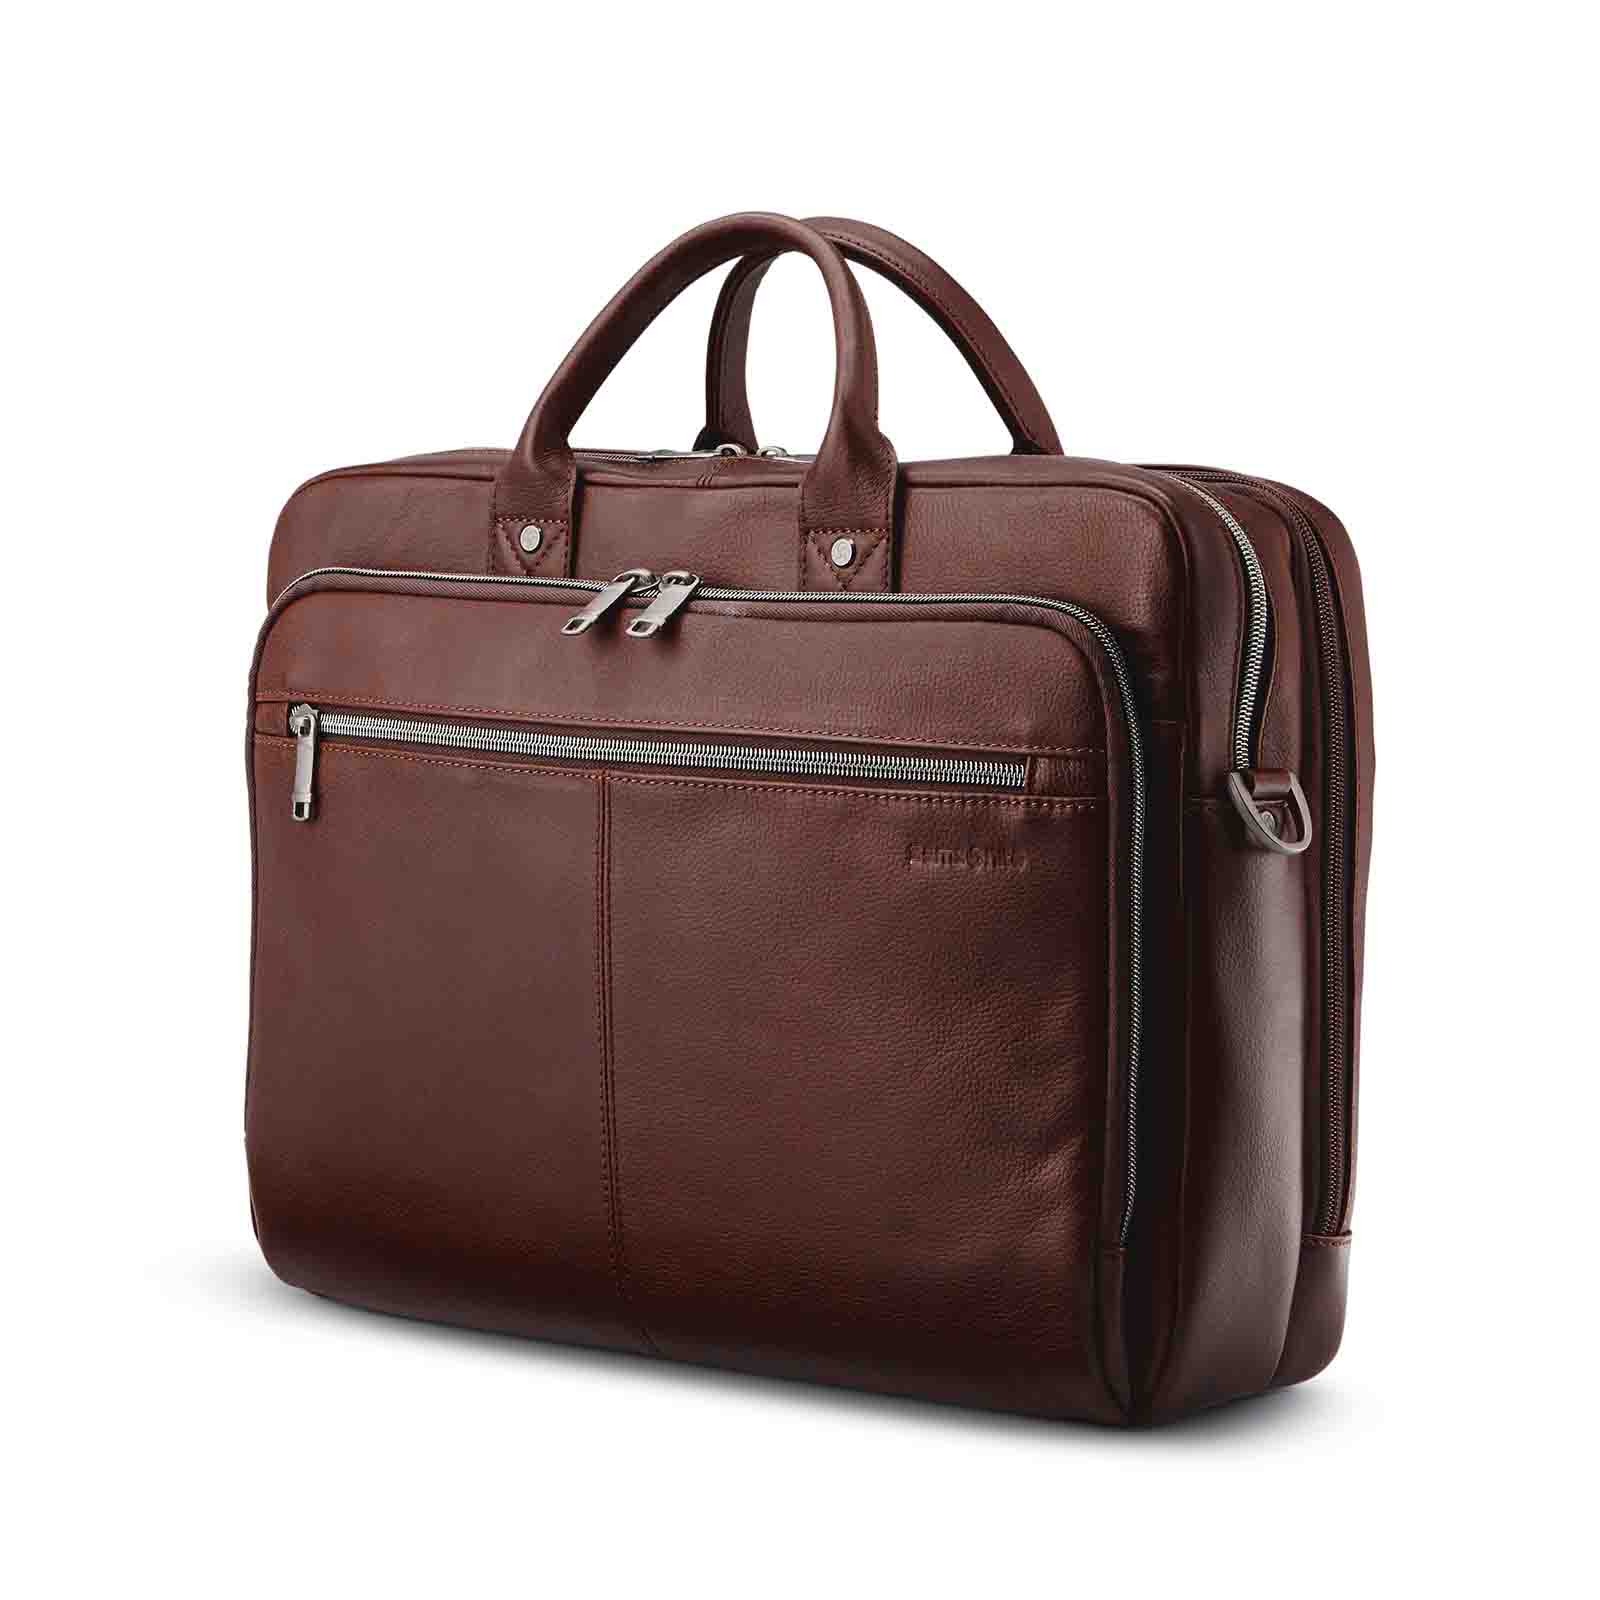 Samsonite-Classic-Leather-15-Inch-Top-Loader-Cognac-Mahogany-Front-Angle